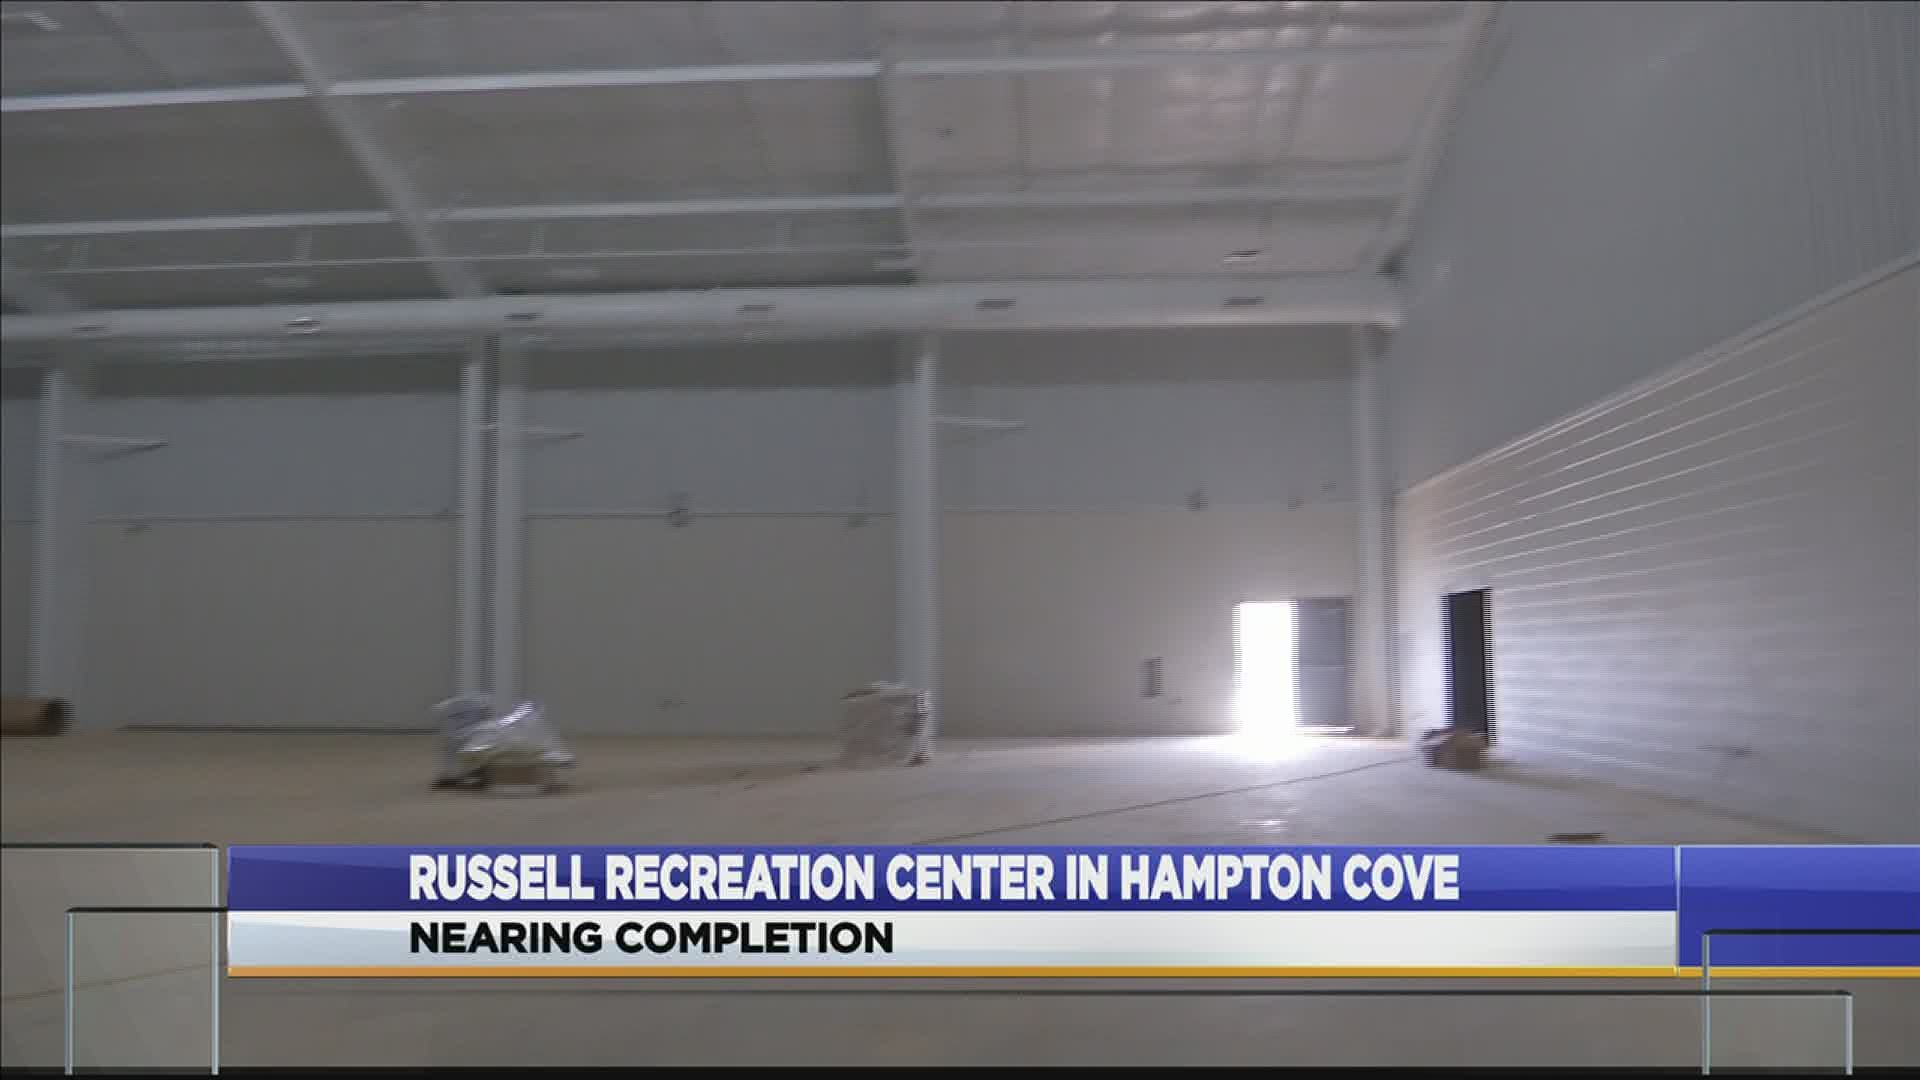 The new rec center will have two courts, a weight room, and a special needs playground.